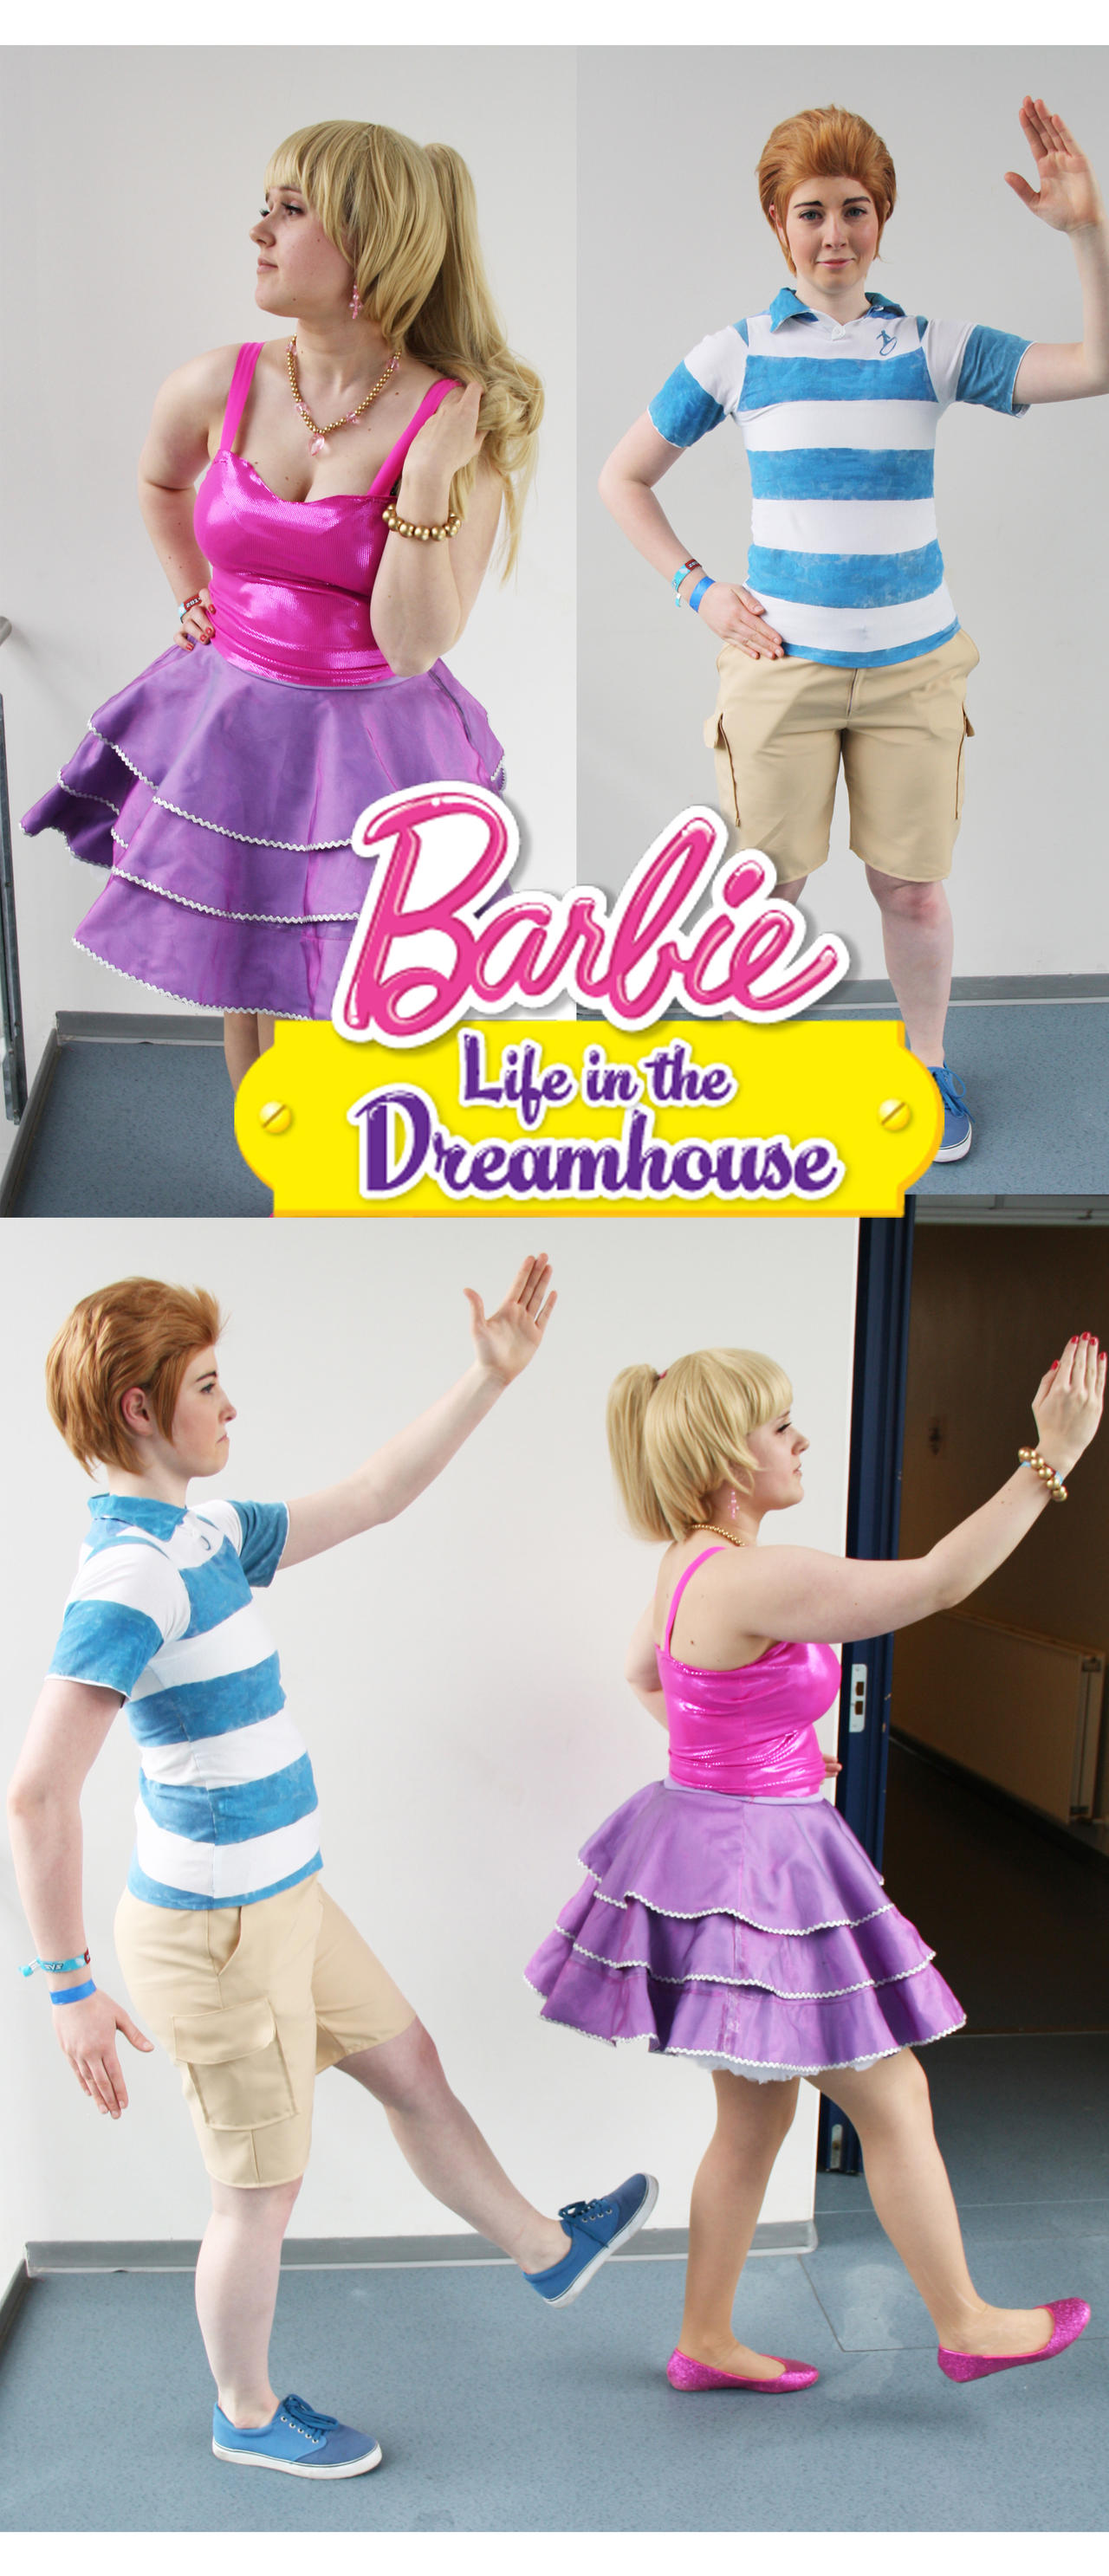 Barbie - a Life in the Dreamhouse